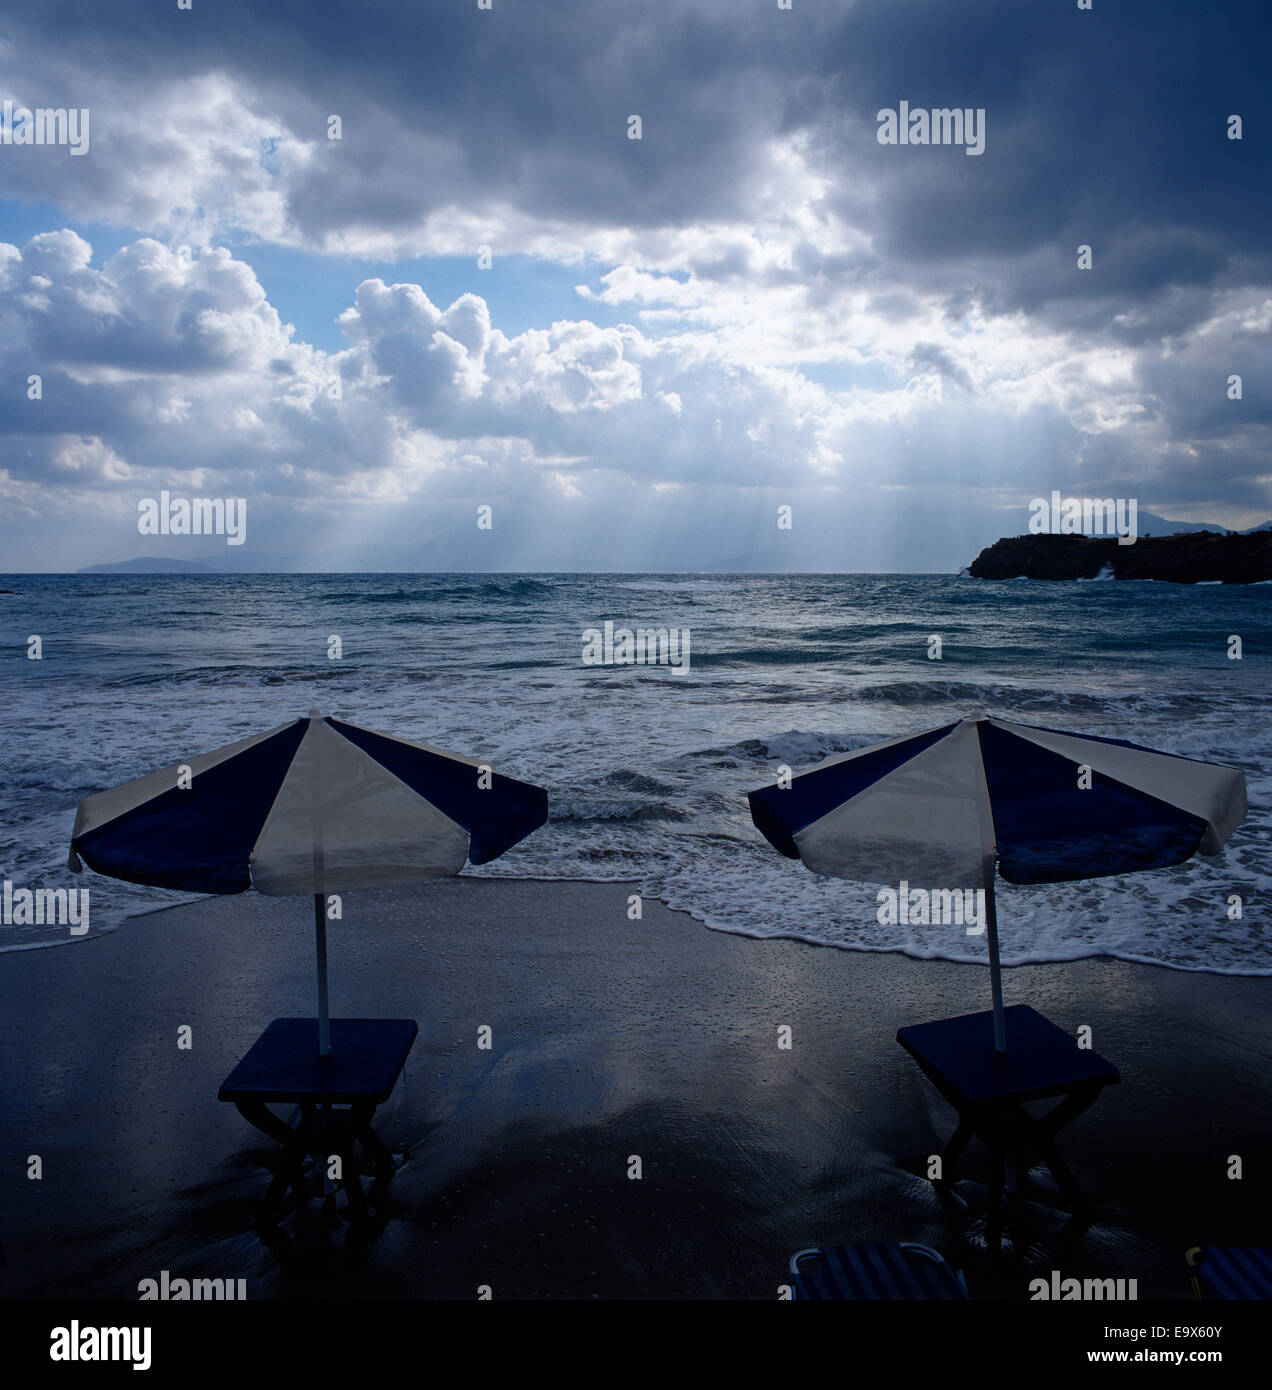 Two blue and white umbrellas on a sand beach Stock Photo